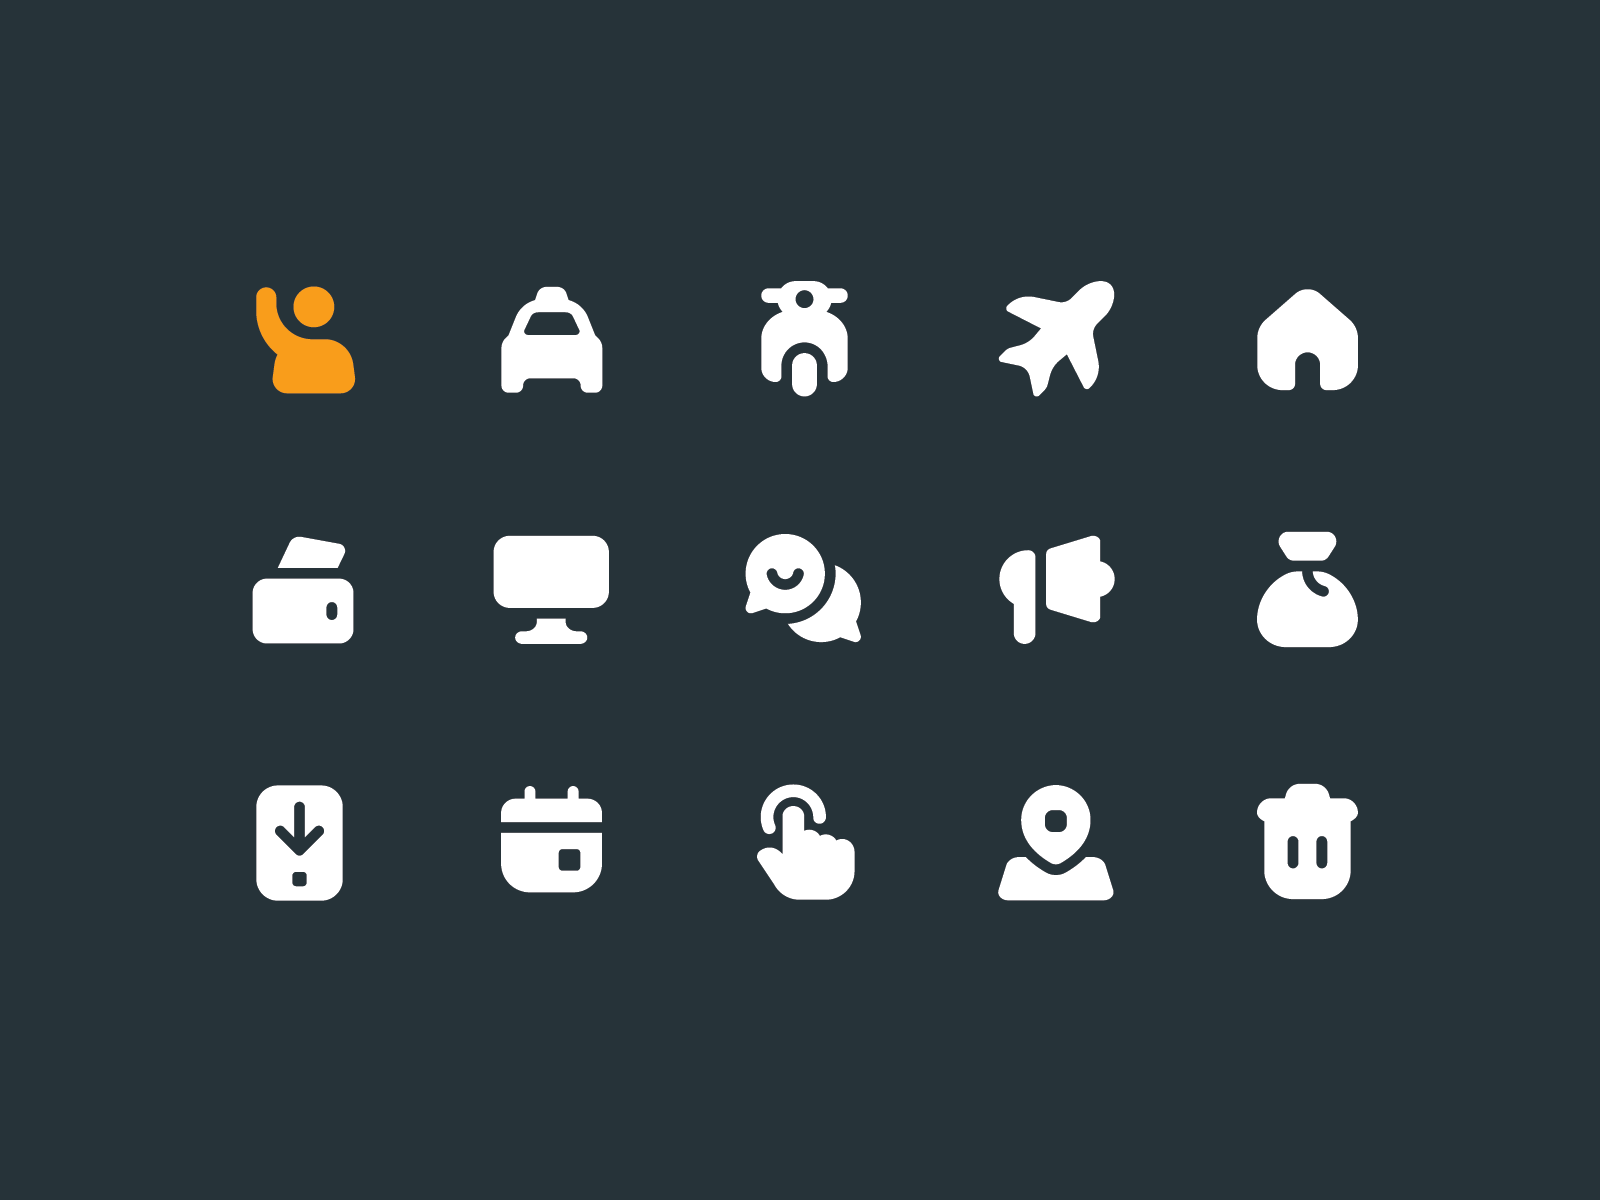 Gett Iconography System + Style Guide app icons brand icons gett icon icon design icon designer icon set icon system iconography icons marketing icons squircle